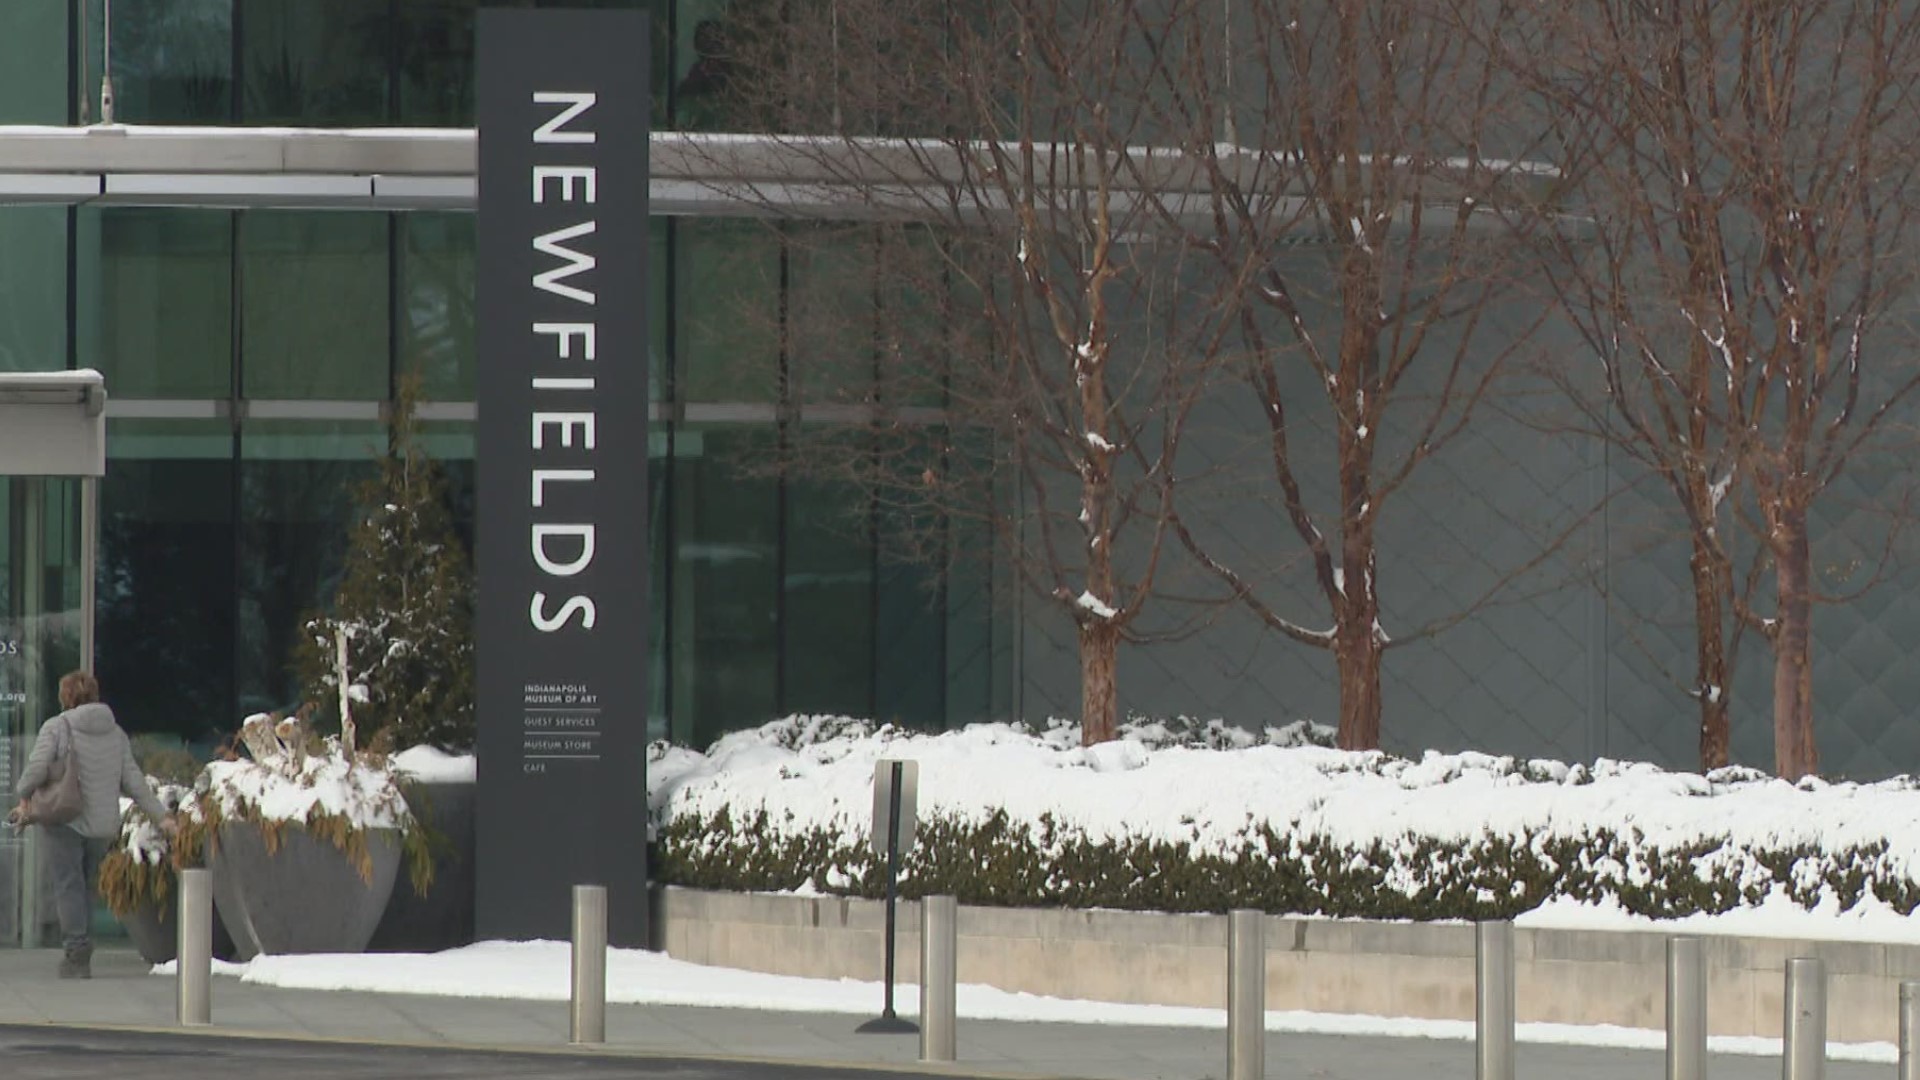 The CEO of Newfields has officially resigned after mounting pressure to step down following a controversial job posting.